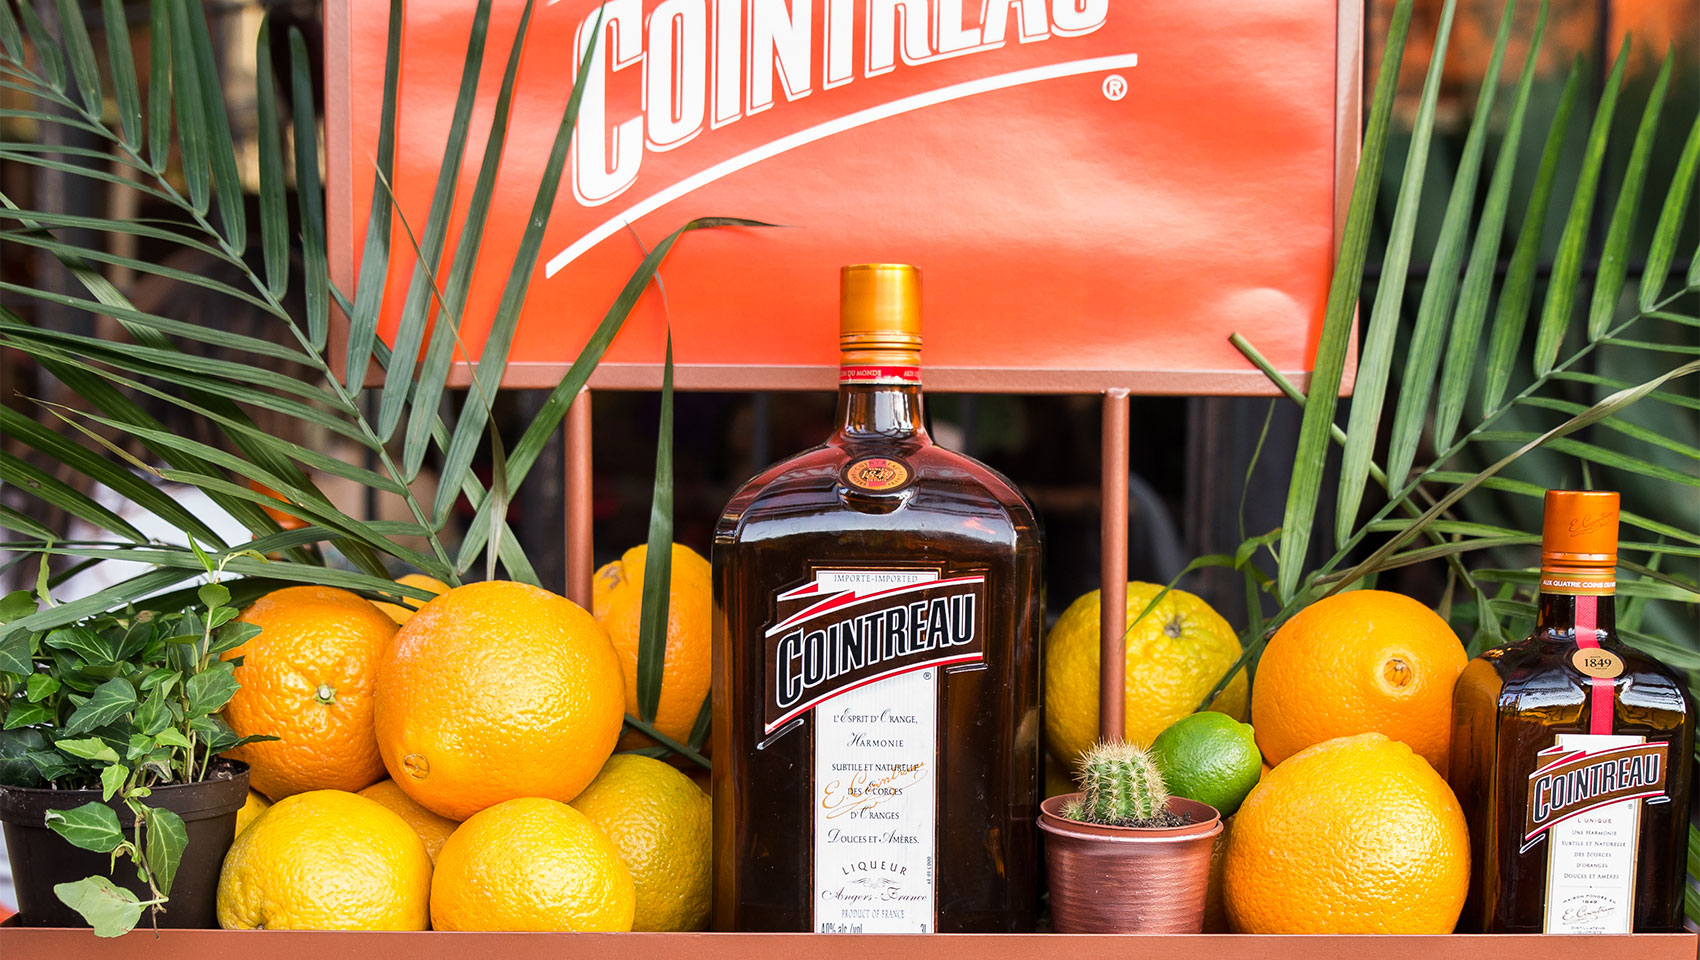 Cointreau bottle and display